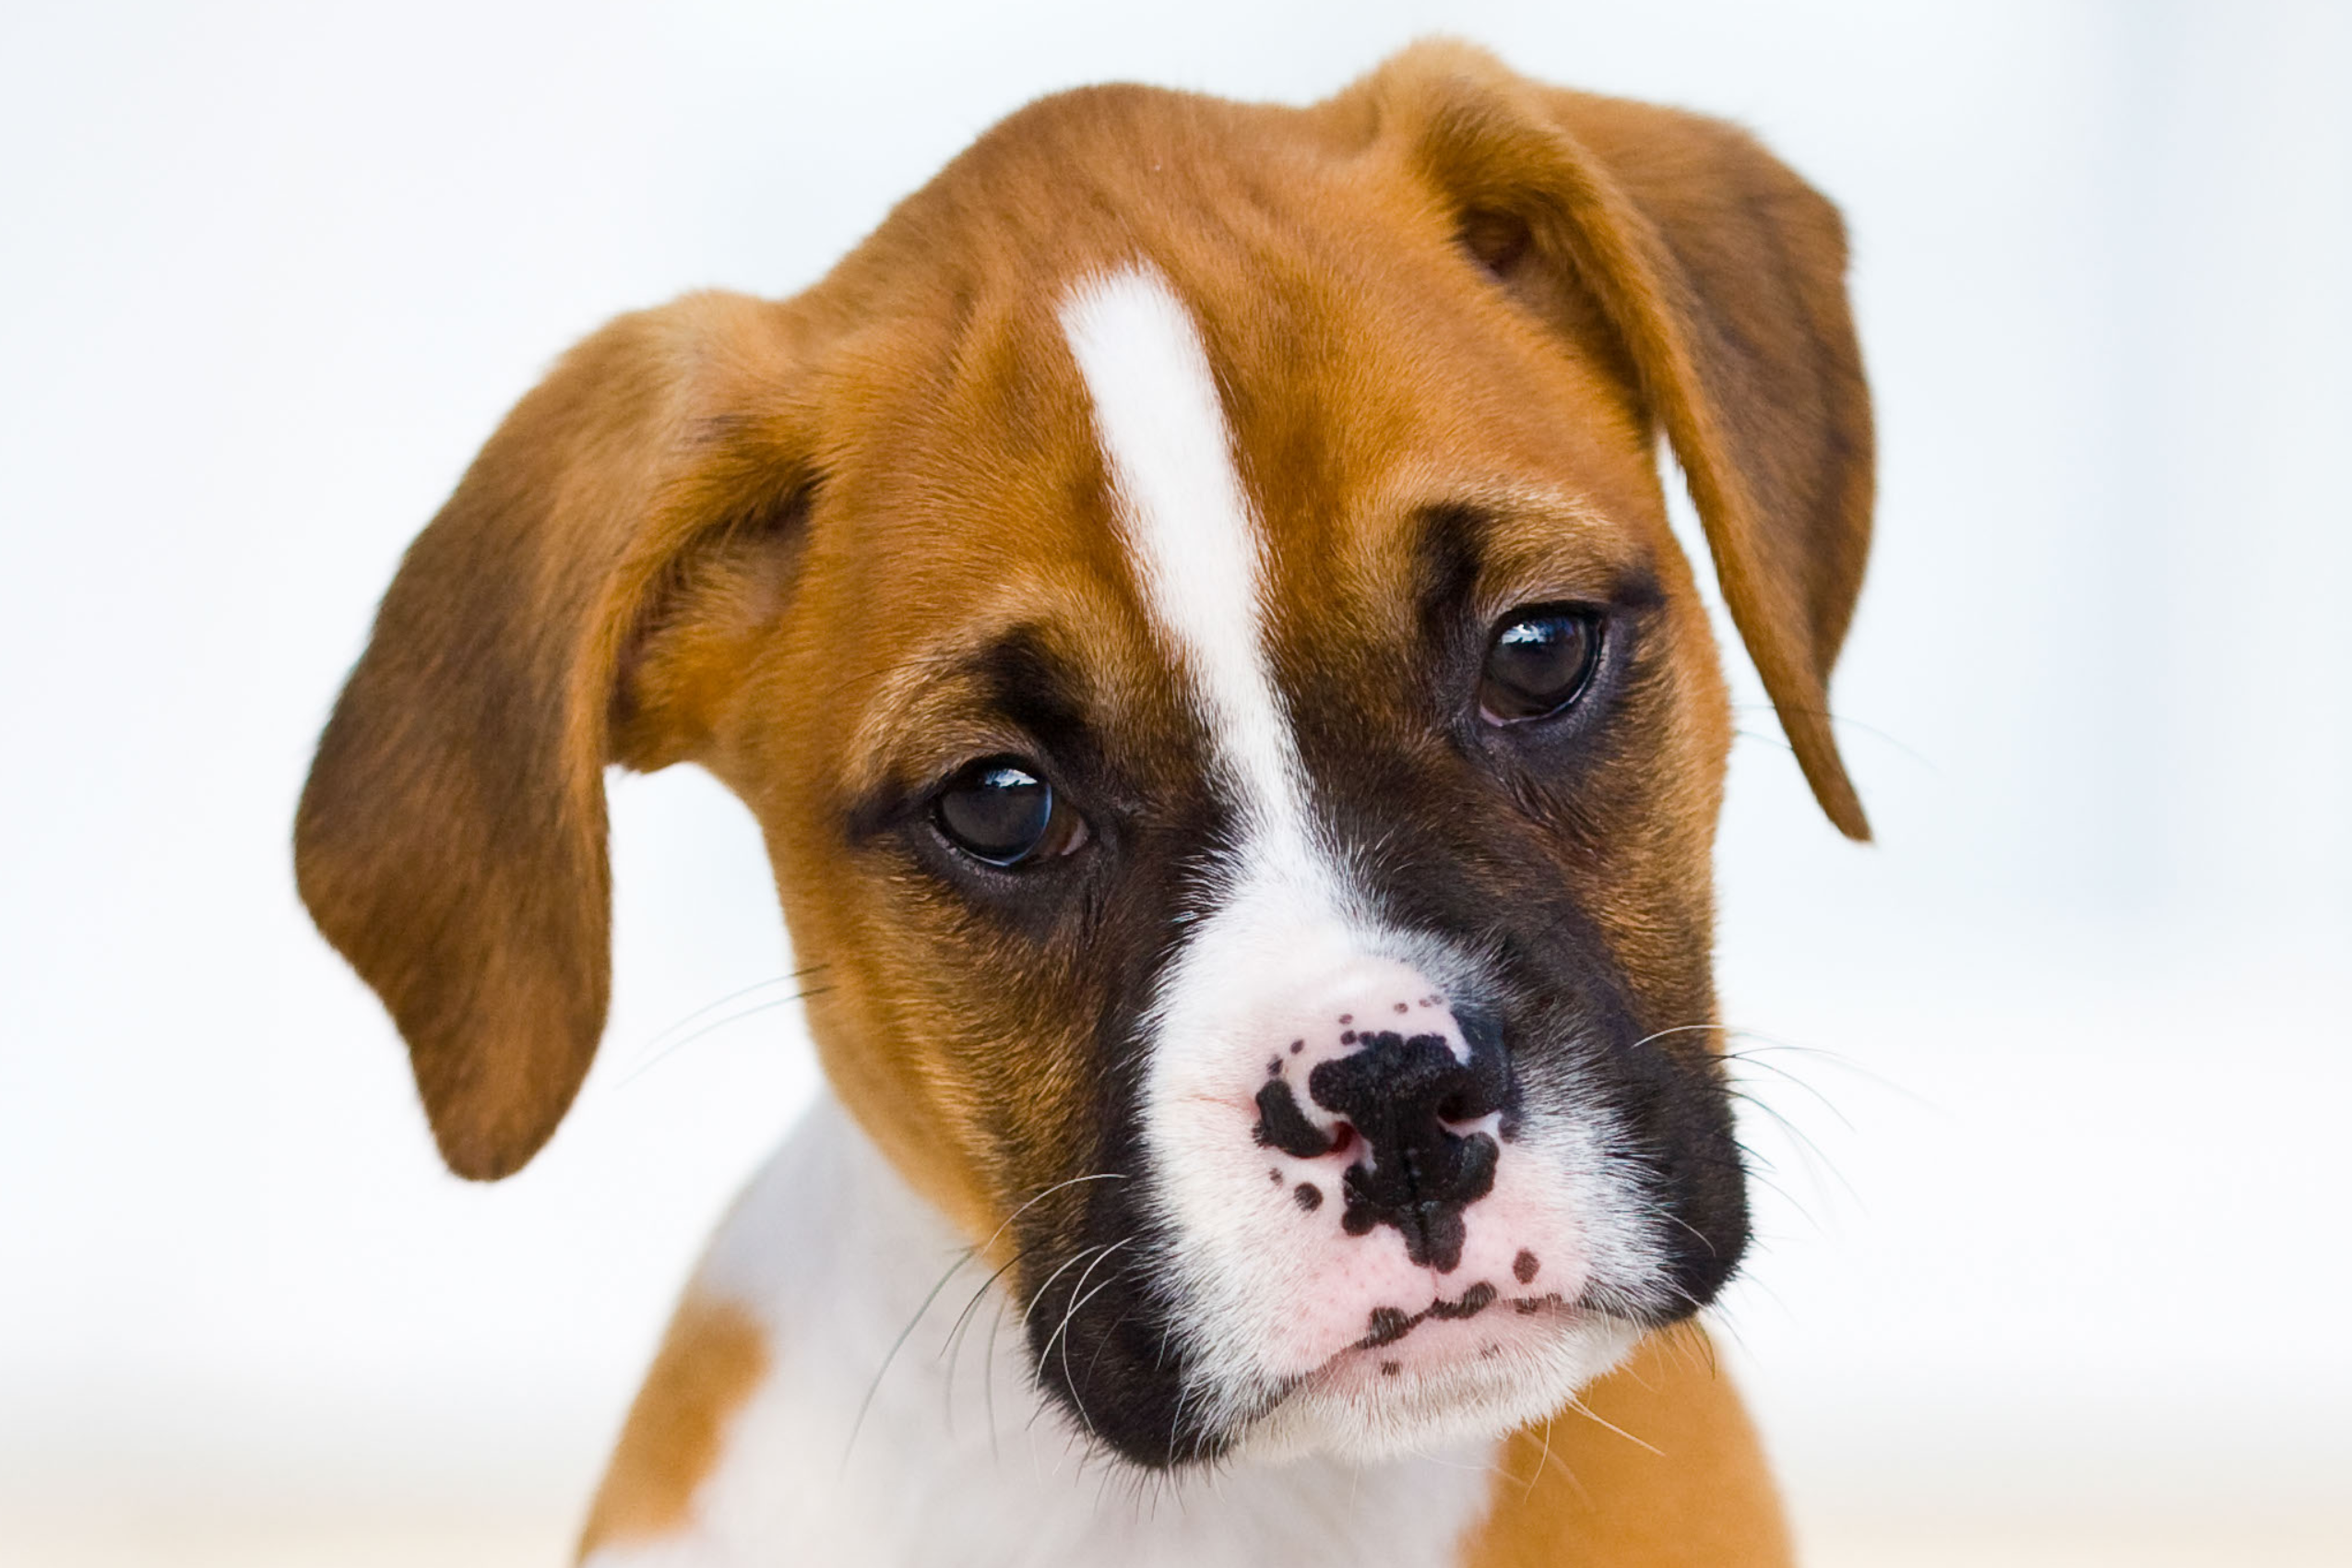 RVC study identifies cancers as health priority in Boxer dogs.